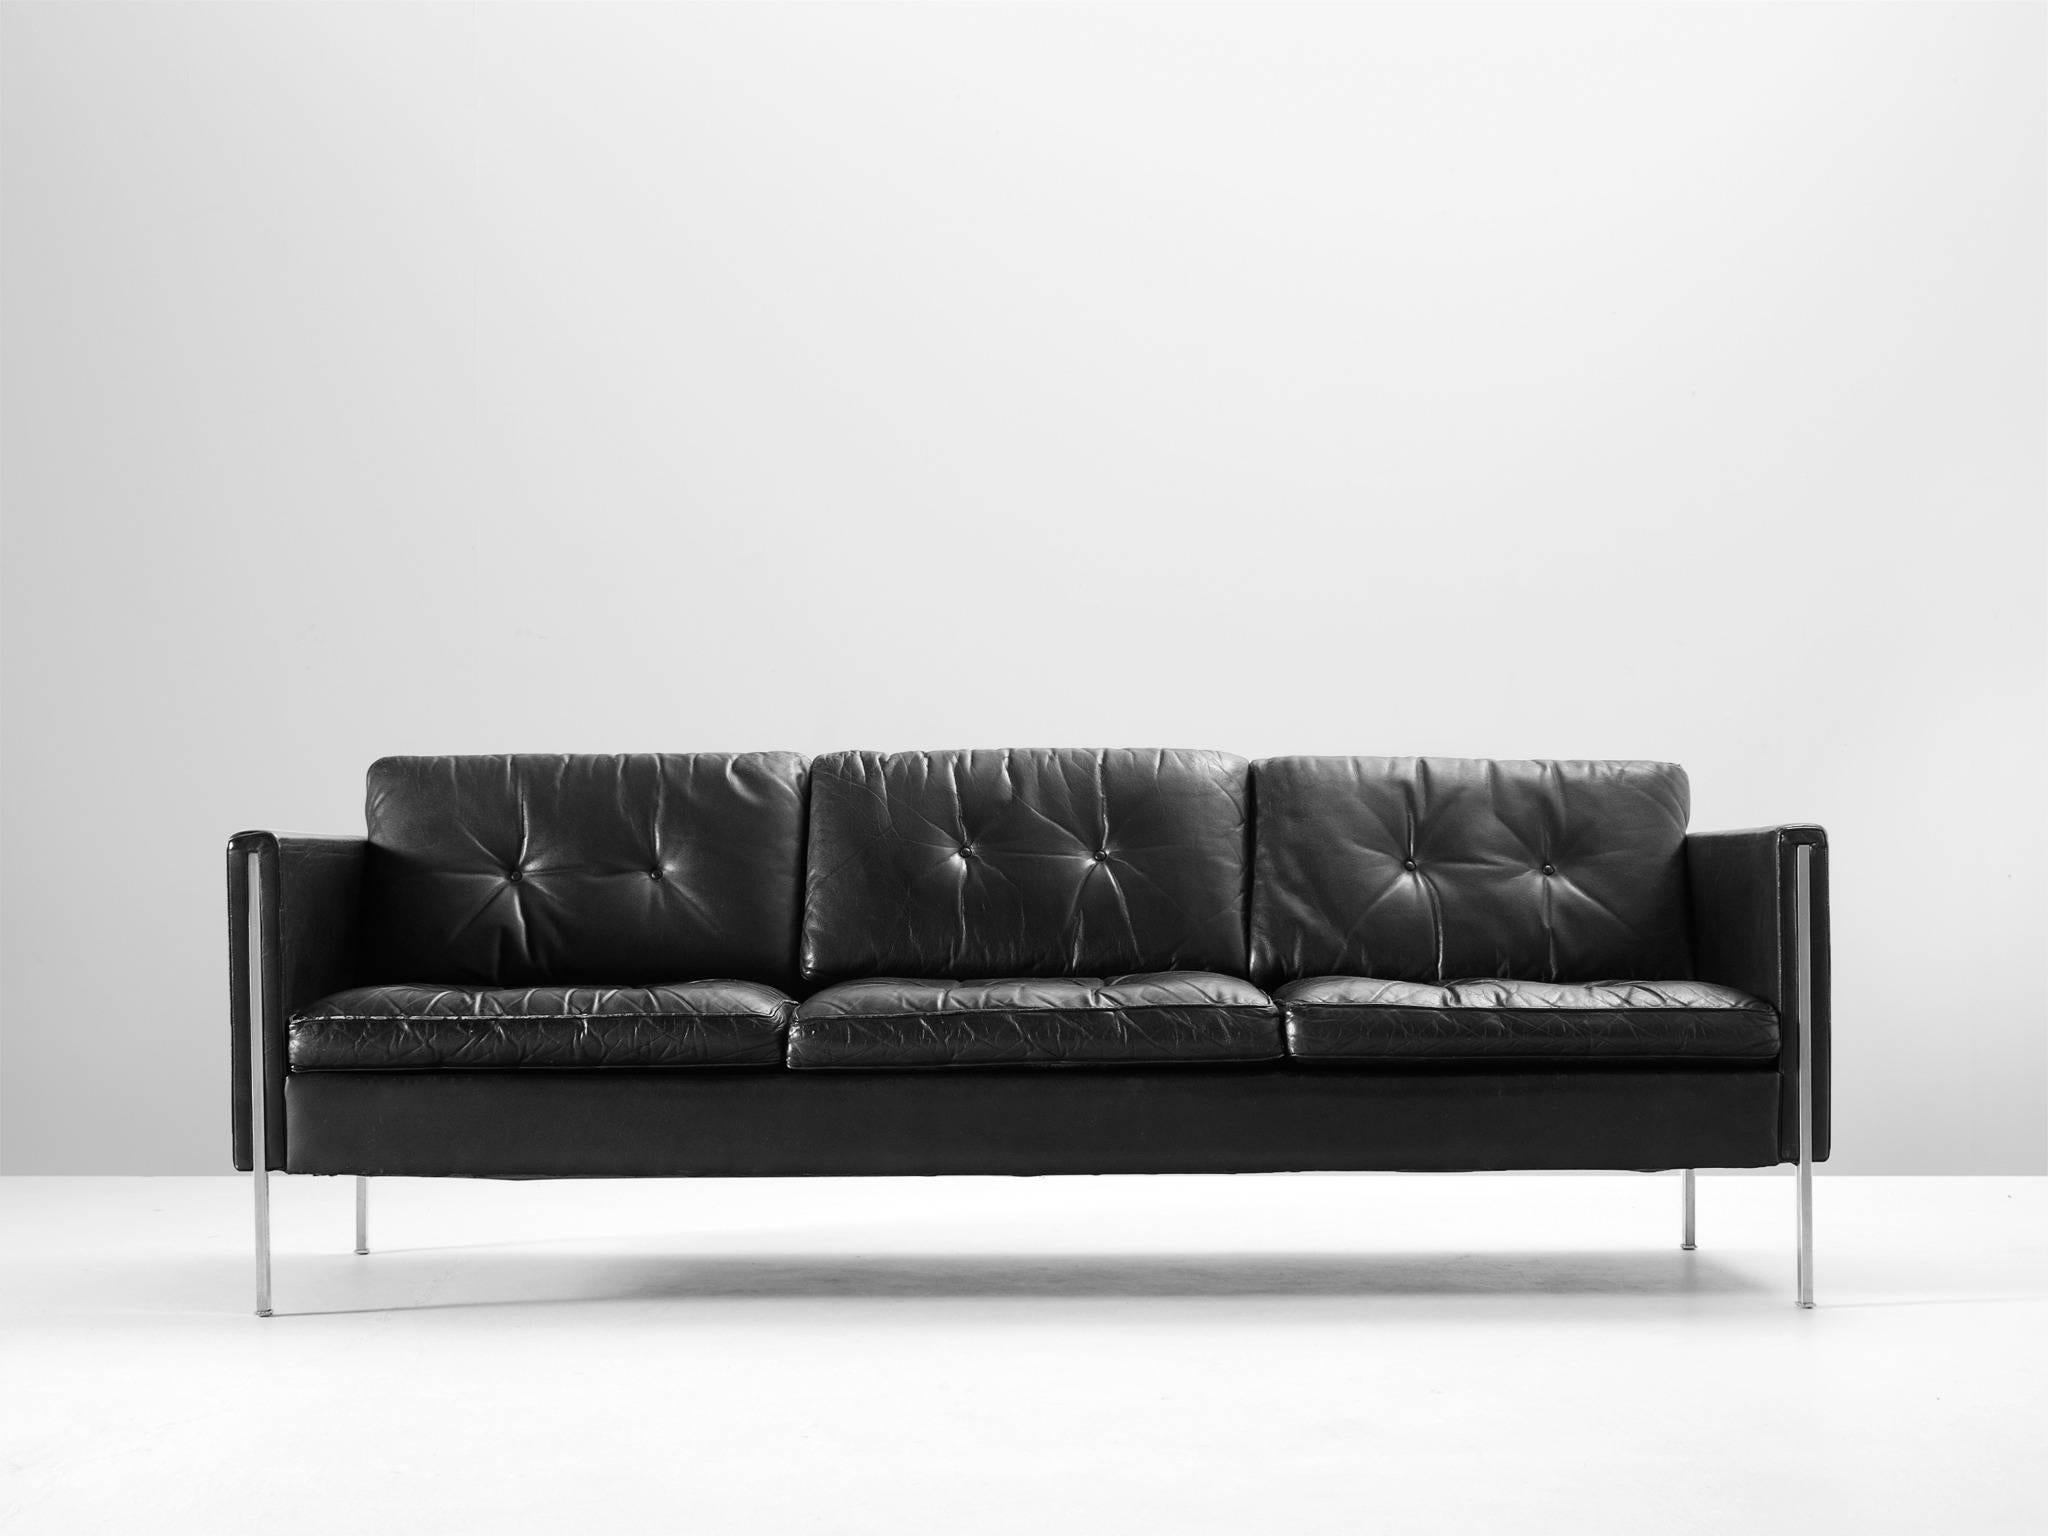 Sofa model '442/3', in leather and steel by Pierre Paulin for Artifort, the Netherlands 1962. 

This comfortable three-seat sofa shows elegant steel details. The combination of steel and leather gives this sofa it's modern and sophisticated look.